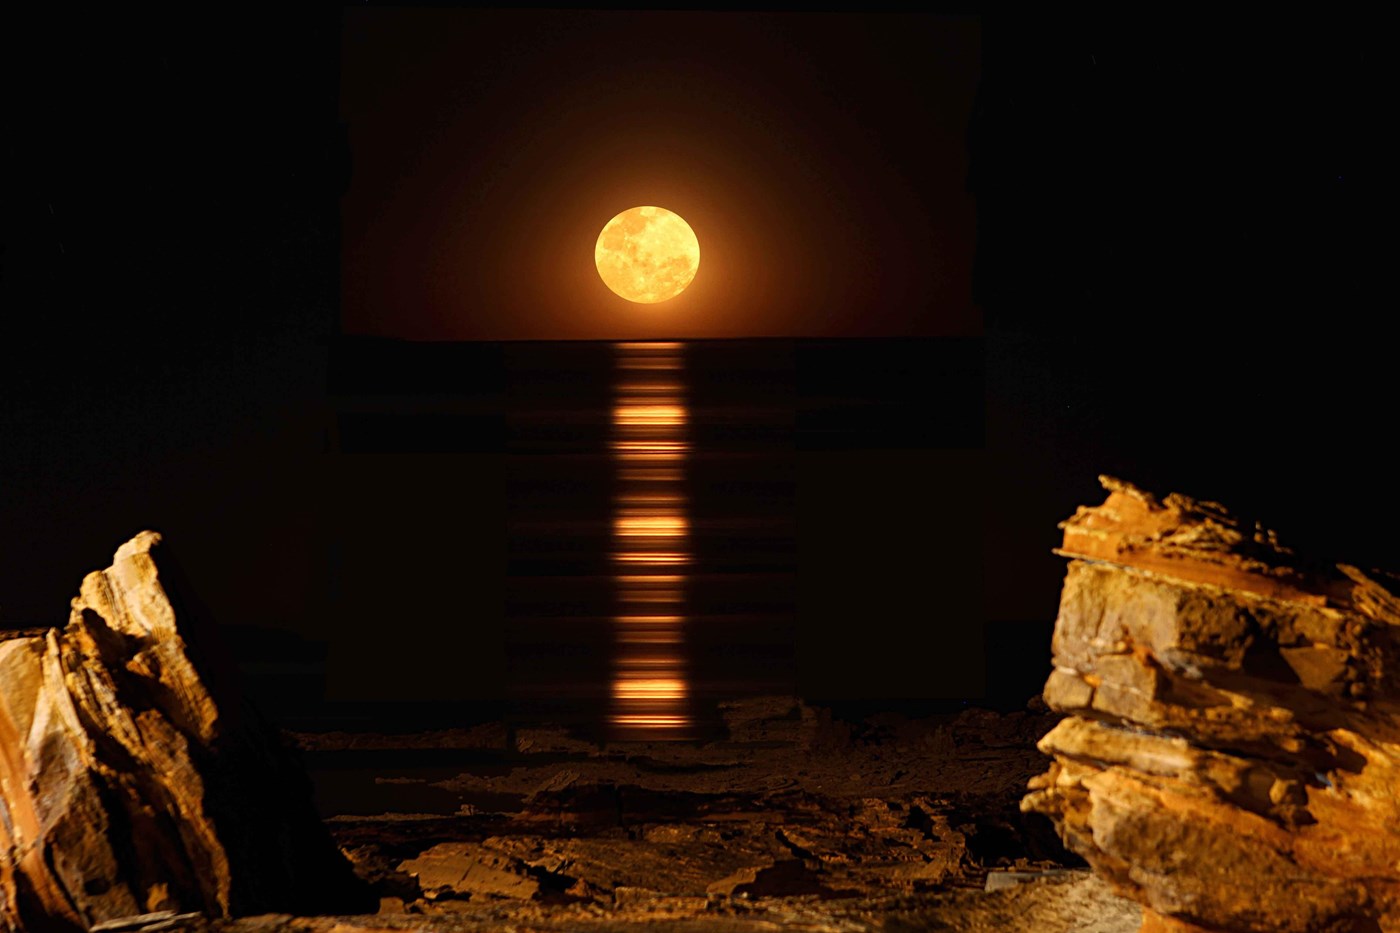 Photo Credit: Visit Broome - Staircase to the Moon